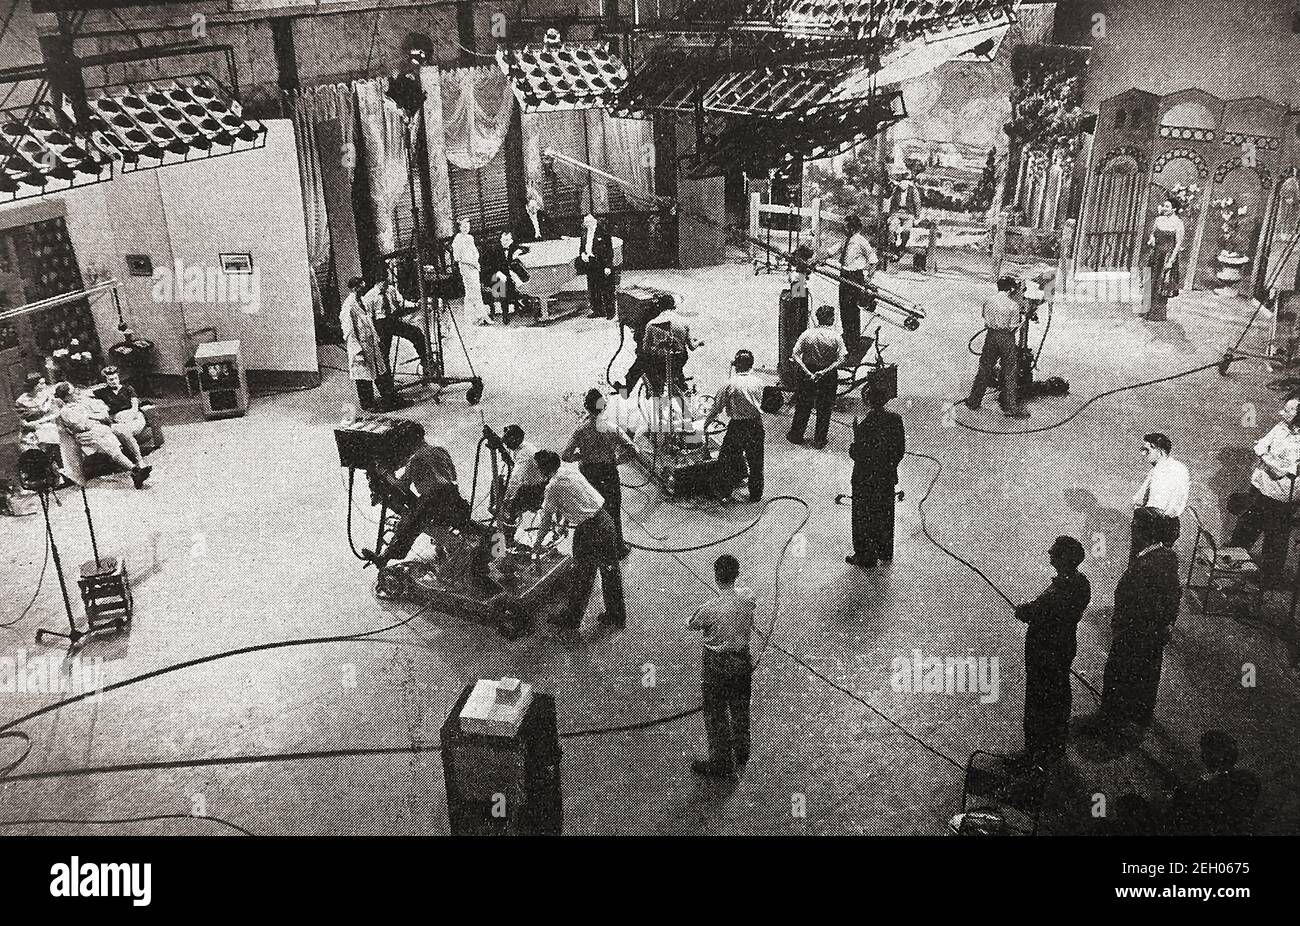 An early printed photograph showing 4 separate sets being filmed simultaneously at the former BBC Lime Grove  television Studios, Shepherds Bush , London, UK.   The complex  had been built originally   by the Gaumont Film Company in 1915. It was used by them and by Gainsborough Pictures. The BBC  used it for television broadcasts until 1991 including the filming of  Steptoe and Son; Doctor Who; Nationwide; Top of the Pops; and The Grove Family (named after the studio). It was demolished in 1993 Stock Photo